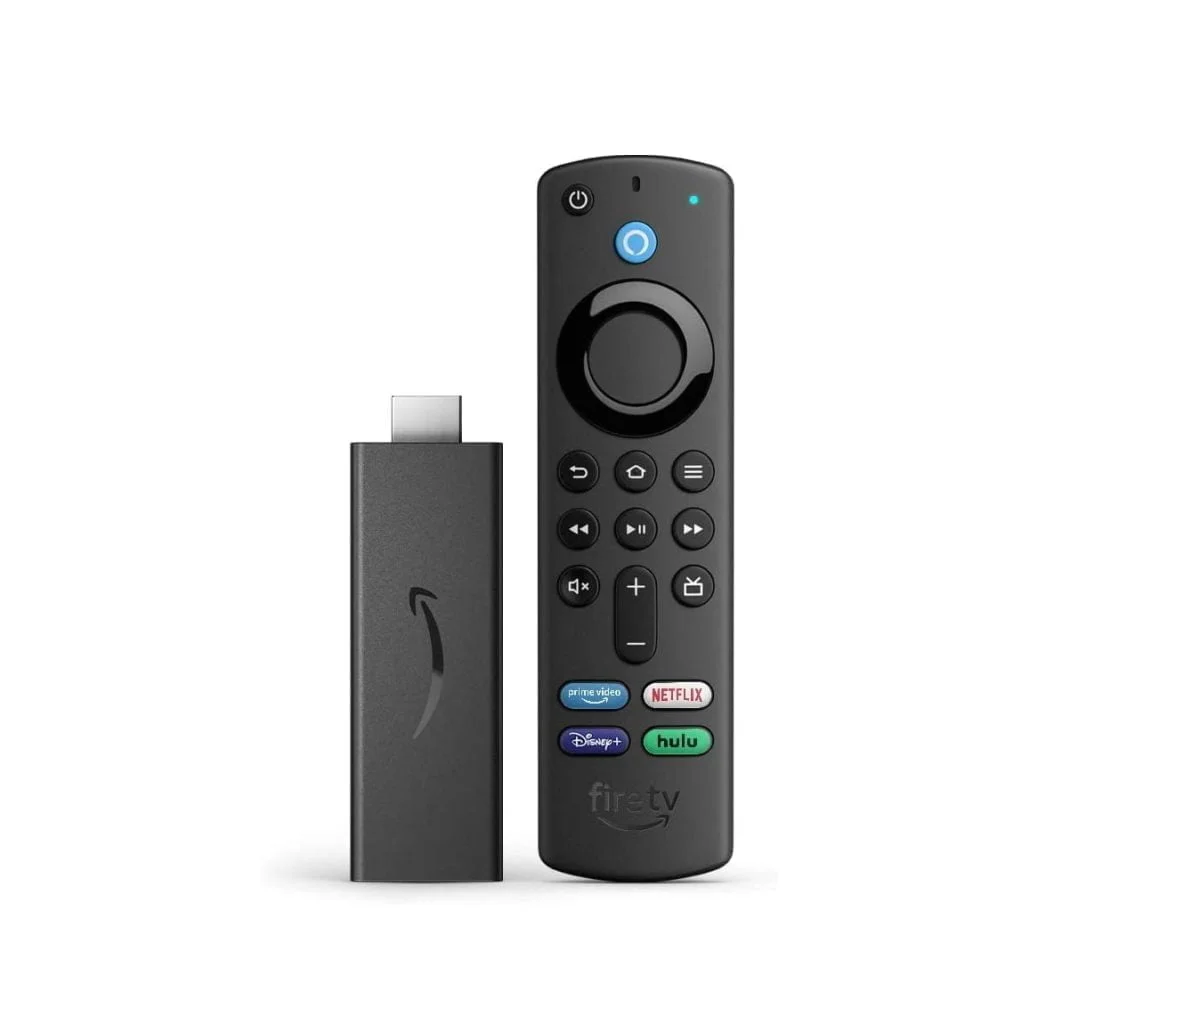 51Kkr5Ugn6L. Ac Sl1000 Amazon &Amp;Lt;H1&Amp;Gt;Fire Tv Stick (3Rd Gen) With Alexa Voice Remote 3Rd Gen (Includes Tv Controls) | Hd Streaming Device | 2021 Release&Amp;Lt;/H1&Amp;Gt; &Amp;Lt;Ul&Amp;Gt; &Amp;Lt;Li&Amp;Gt;&Amp;Lt;Span Class=&Amp;Quot;A-List-Item&Amp;Quot;&Amp;Gt; Latest Generation Of Our Best-Selling Fire Tv Device - 50% More Powerful Than The 2Nd Generation For Fast Streaming In Full Hd. Includes Alexa Voice Remote With Power And Volume Buttons.&Amp;Lt;/Span&Amp;Gt;&Amp;Lt;/Li&Amp;Gt; &Amp;Lt;Li&Amp;Gt;500,000+ Movies And Tv Episodes - With Thousands Included In Your Prime Membership.&Amp;Lt;/Li&Amp;Gt; &Amp;Lt;Li&Amp;Gt;Tens Of Thousands Of Channels, Alexa Skills, And Apps - Including Netflix, Youtube, Prime Video, Disney+, Apple Tv, And Hbo Max. Subscription Fees May Apply.&Amp;Lt;/Li&Amp;Gt; &Amp;Lt;Li&Amp;Gt;Live Tv - Watch Your Favorite Live Tv, News, And Sports With Subscriptions To Sling Tv, Youtube Tv, And Others. Use The Guide Button To See What'S Available And When.&Amp;Lt;/Li&Amp;Gt; &Amp;Lt;Li&Amp;Gt;Free Tv - Access Over 20,000 Free Movies And Tv Shows From Apps Like Imdb Tv, Tubi, Pluto Tv, And More.&Amp;Lt;/Li&Amp;Gt; &Amp;Lt;Li&Amp;Gt;Listen To Music - Stream On Amazon Music, Spotify, Pandora, And Others. Subscription Fees May Apply.&Amp;Lt;/Li&Amp;Gt; &Amp;Lt;Li&Amp;Gt;Less Clutter, More Control - Alexa Voice Remote Lets You Use Your Voice To Search And Launch Shows Across Apps. All-New Preset Buttons Get You To Favorite Apps Quickly. Plus, Control Power And Volume On Your Tv And Soundbar With A Single Remote.&Amp;Lt;/Li&Amp;Gt; &Amp;Lt;/Ul&Amp;Gt; &Amp;Lt;H2&Amp;Gt;Included In The Box&Amp;Lt;/H2&Amp;Gt; Fire Tv Stick (3Rd Gen), &Amp;Lt;A Href=&Amp;Quot;Https://Www.amazon.com/Dp/B08D6Wjyd9&Amp;Quot;&Amp;Gt;Alexa Voice Remote (3Rd Gen)&Amp;Lt;/A&Amp;Gt;, Usb Cable And Power Adapter, Hdmi Extender, 2 Aaa Batteries, &Amp;Lt;A Href=&Amp;Quot;Https://Customerdocumentation.s3-Us-West-2.Amazonaws.com/Amazon+Fire+Tv+User+Guides/Fire+Tv+Stick+Device+Documentation/22-002693-01_Firetvstick_Gen3_Online_Qsg_Us.pdf&Amp;Quot;&Amp;Gt;Quick Start Guide&Amp;Lt;/A&Amp;Gt; &Amp;Lt;Div Class=&Amp;Quot;A-Row A-Expander-Container A-Expander-Inline-Container&Amp;Quot;&Amp;Gt; &Amp;Lt;Div Class=&Amp;Quot;A-Expander-Content A-Expander-Extend-Content A-Expander-Content-Expanded&Amp;Quot;&Amp;Gt;&Amp;Lt;/Div&Amp;Gt; &Amp;Lt;/Div&Amp;Gt; Amazon Fire Tv Stick Amazon Fire Tv Stick (3Rd Gen) With Alexa Voice Remote 3Rd Gen (Includes Tv Controls) | Hd Streaming Device